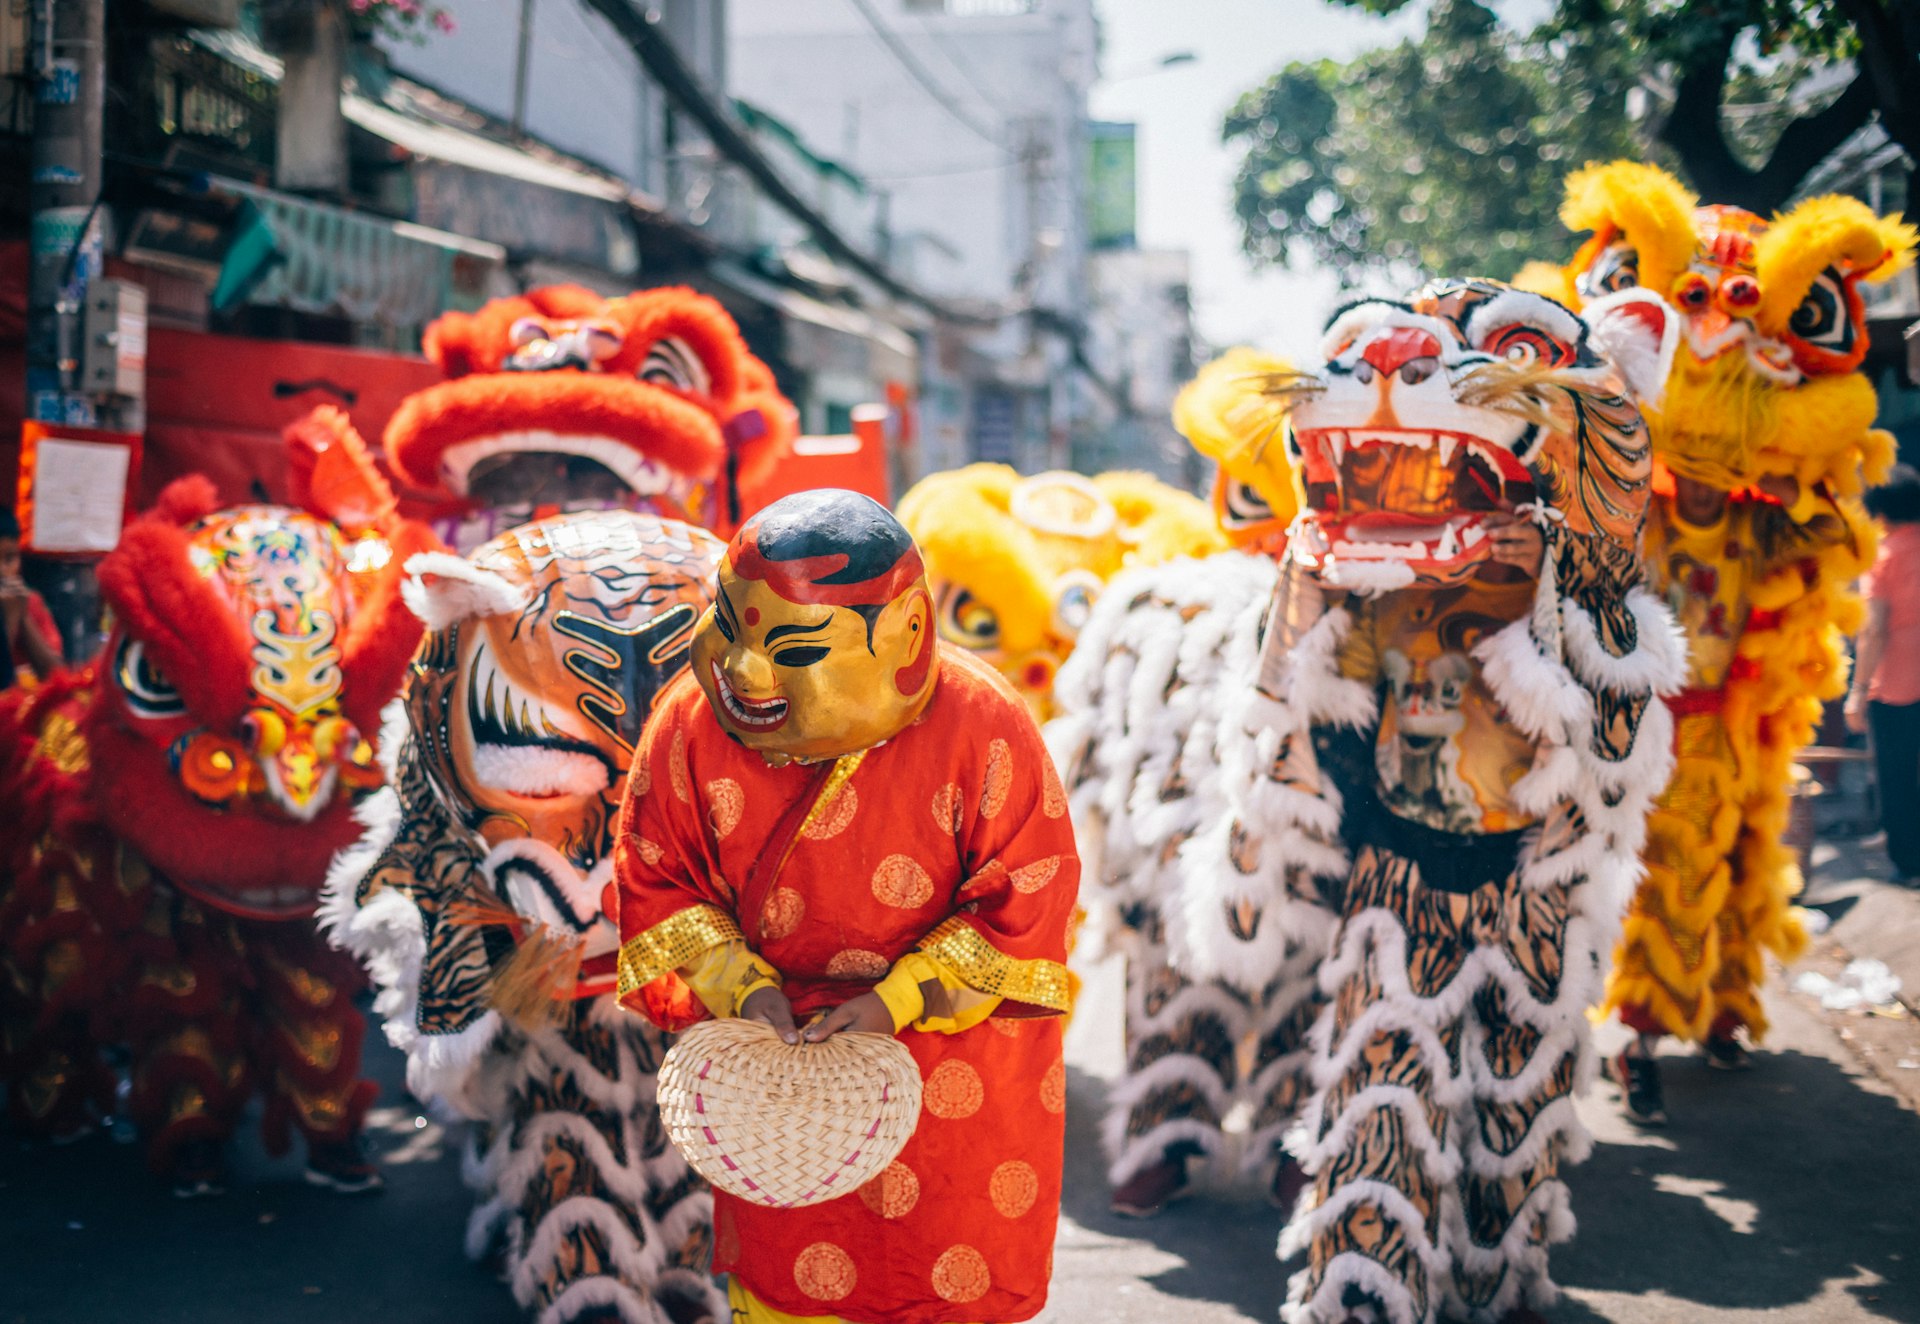 Dancing performers move through the streets of Ho Chi Minh City during the lunar new year